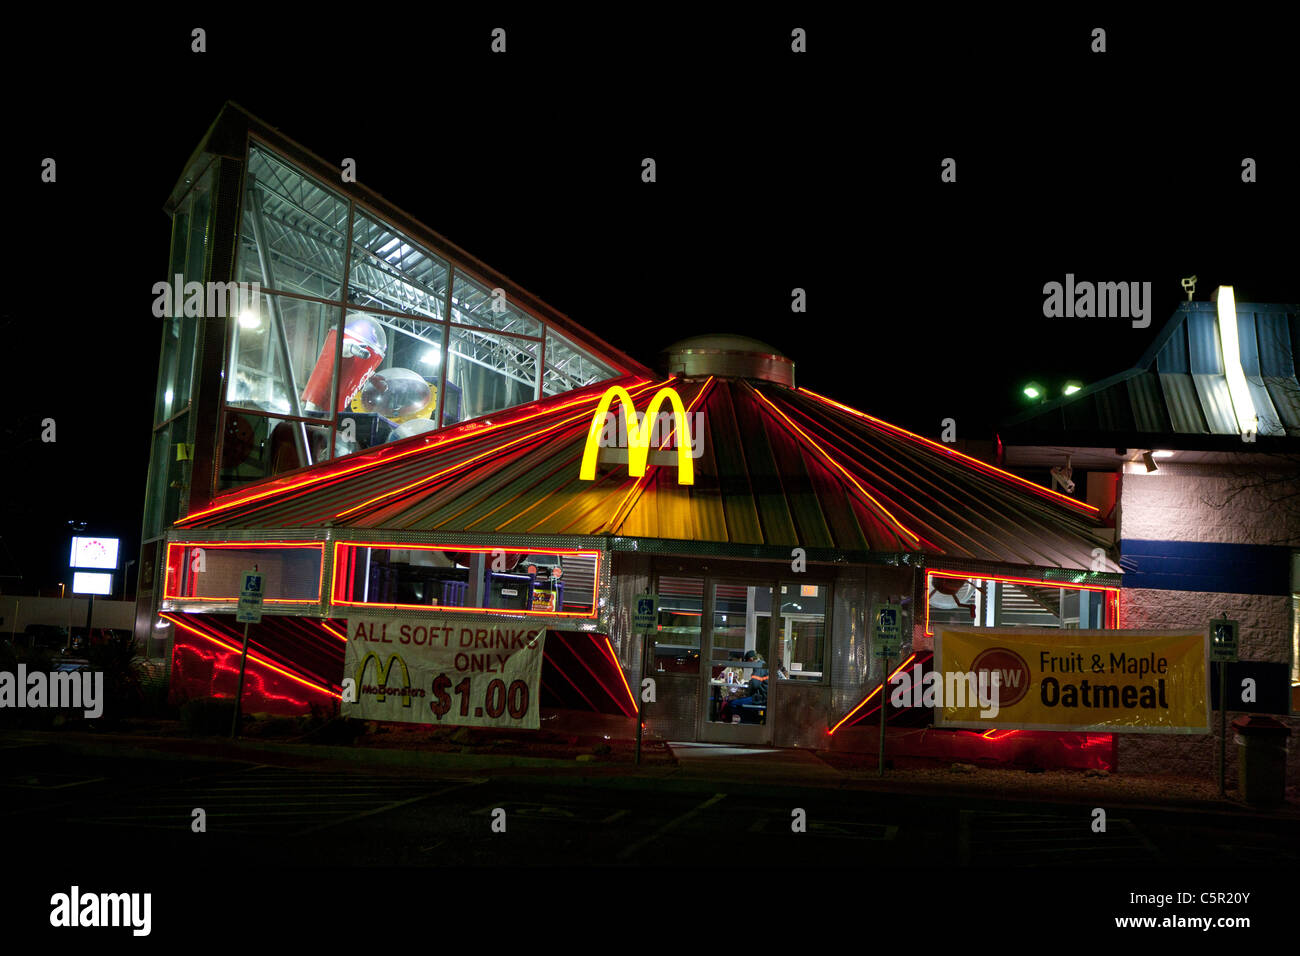 Exterior of McDonald's restaurant at night, shaped like a flying saucer, Roswell, New Mexico, United States of America Stock Photo